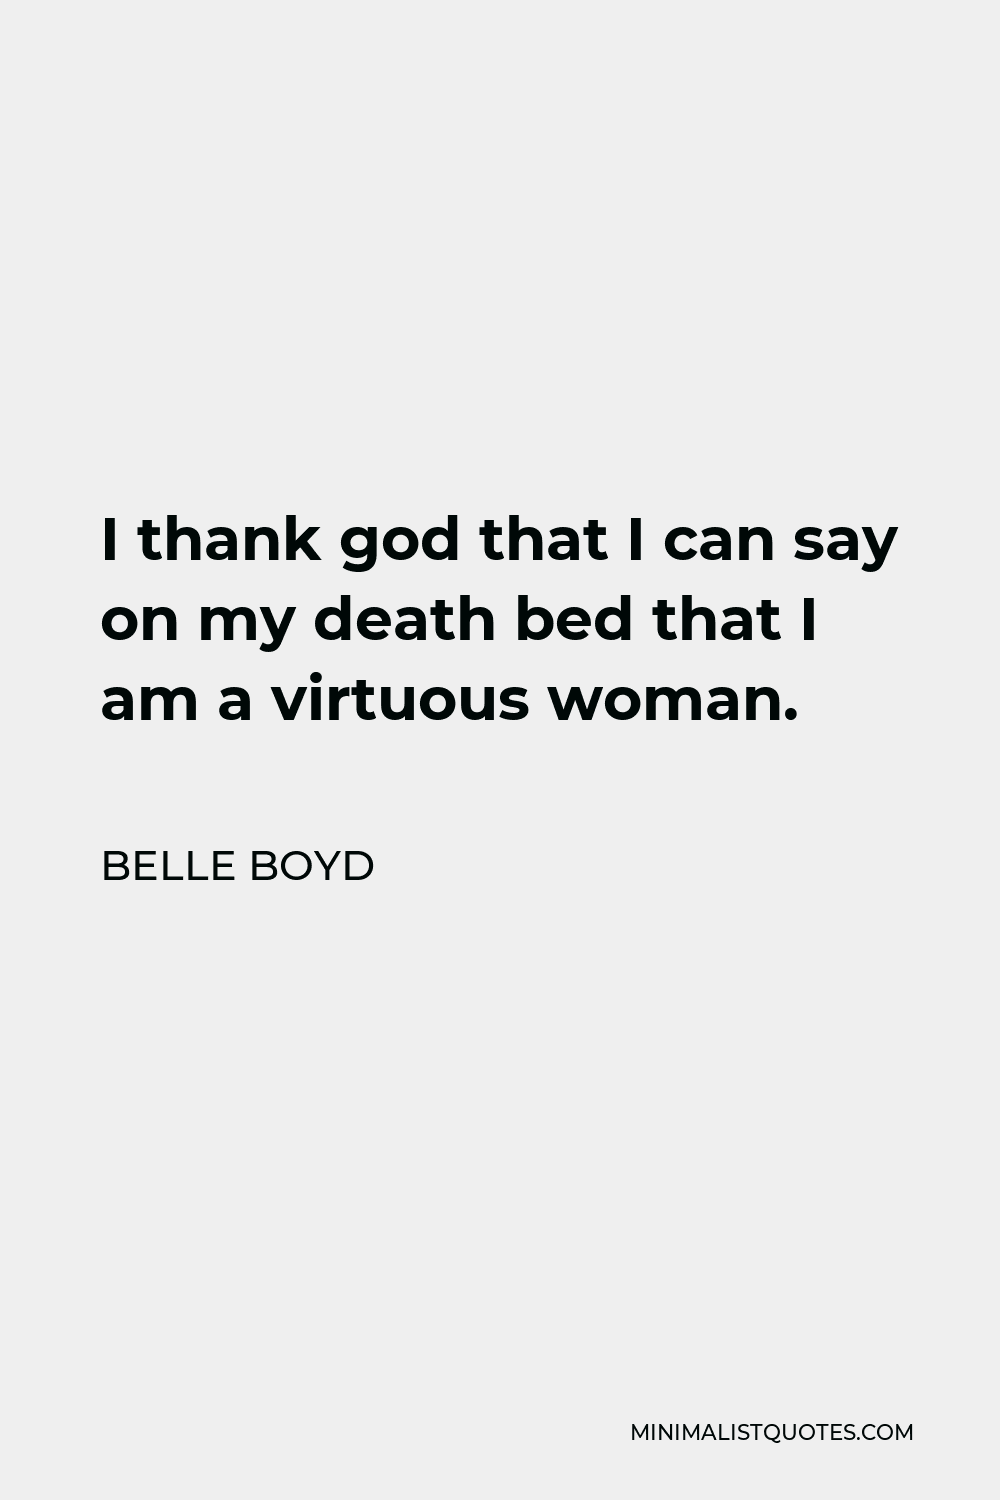 Belle Boyd Quote - I thank god that I can say on my death bed that I am a virtuous woman.